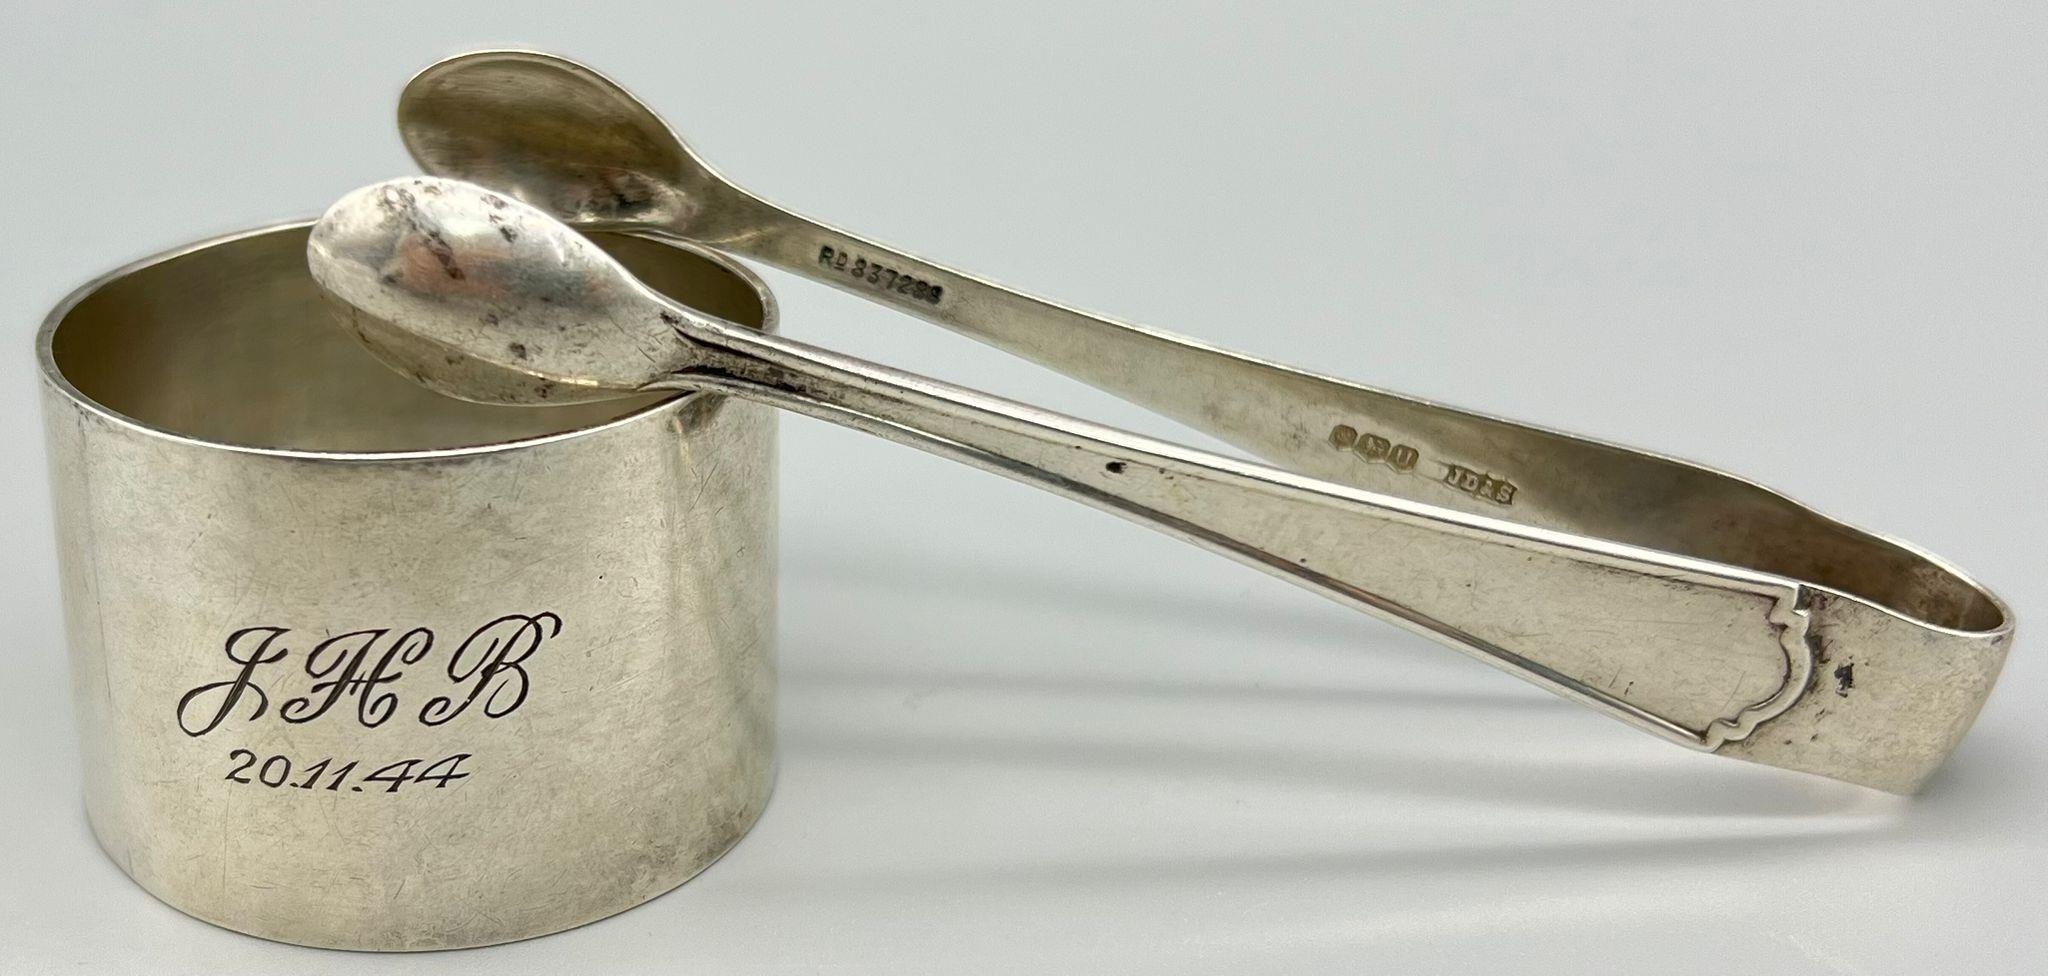 A Quirky 925 Silver mix lot of Napkin Ring and tongs. Tongs are Marked for James Deakin &Sons